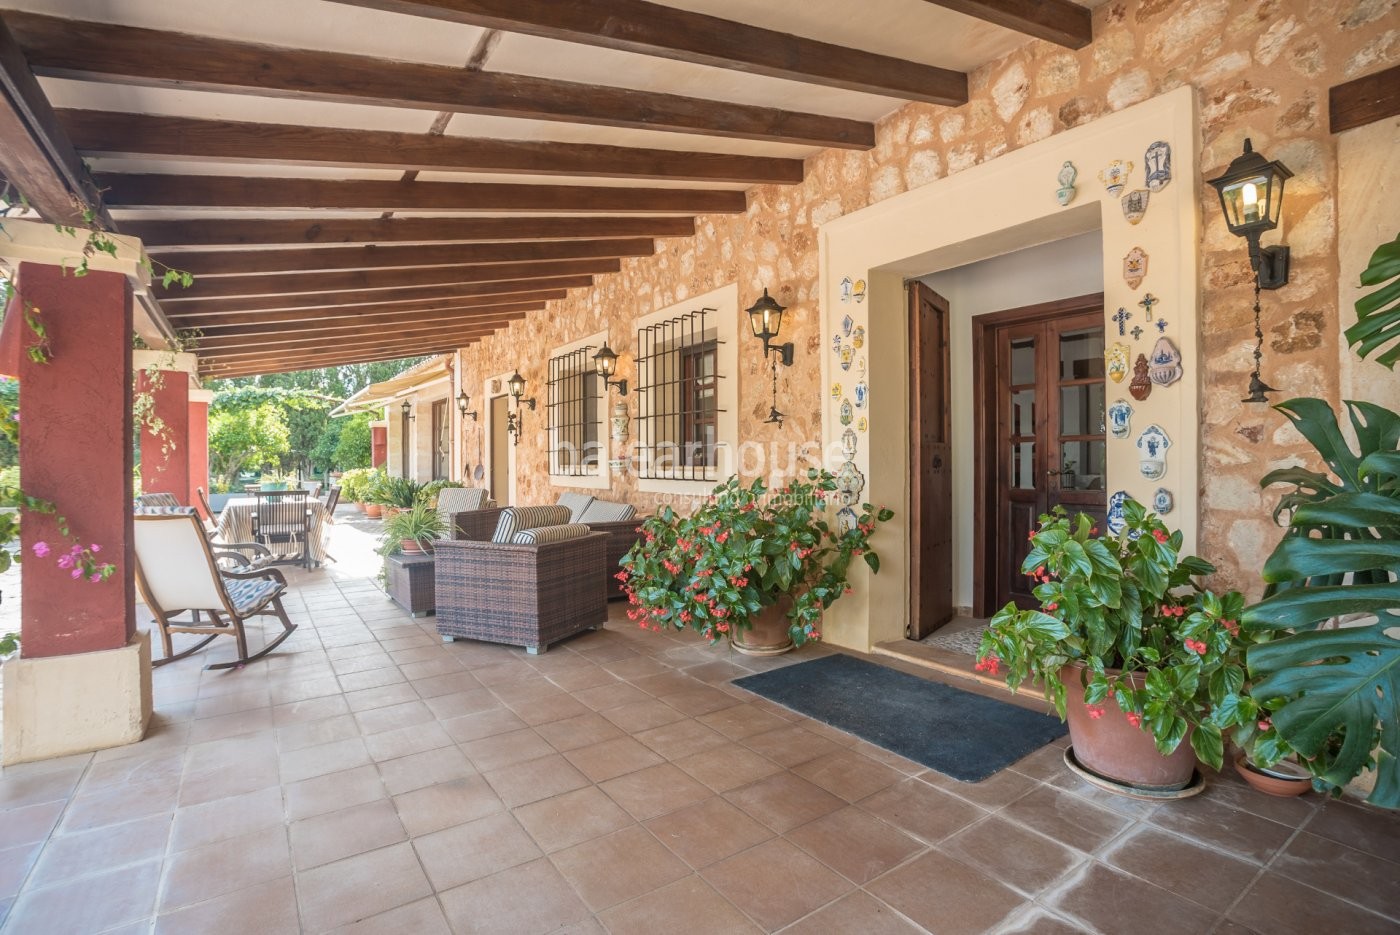 Large Mallorcan house with impressive garden and views over the rustic and beautiful countryside.